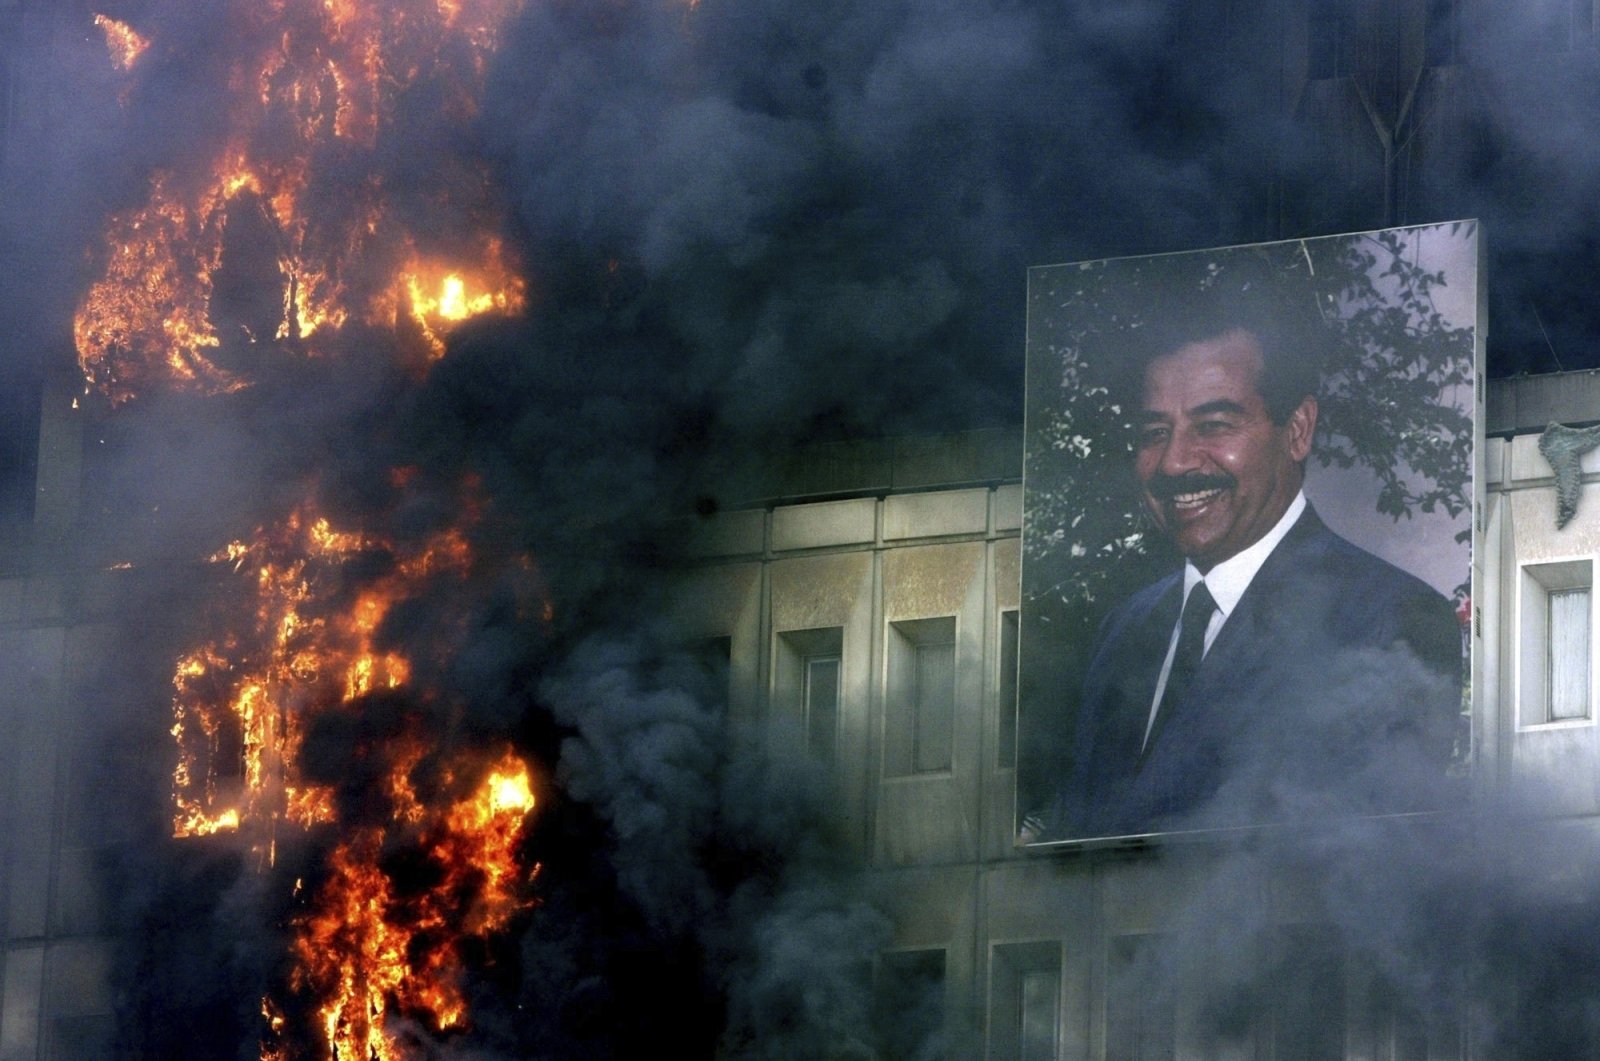 A portrait of Saddam Hussein still hangs on the burning Ministry of Transport and Communication building in Baghdad, April 9, 2003. (AP Photo)